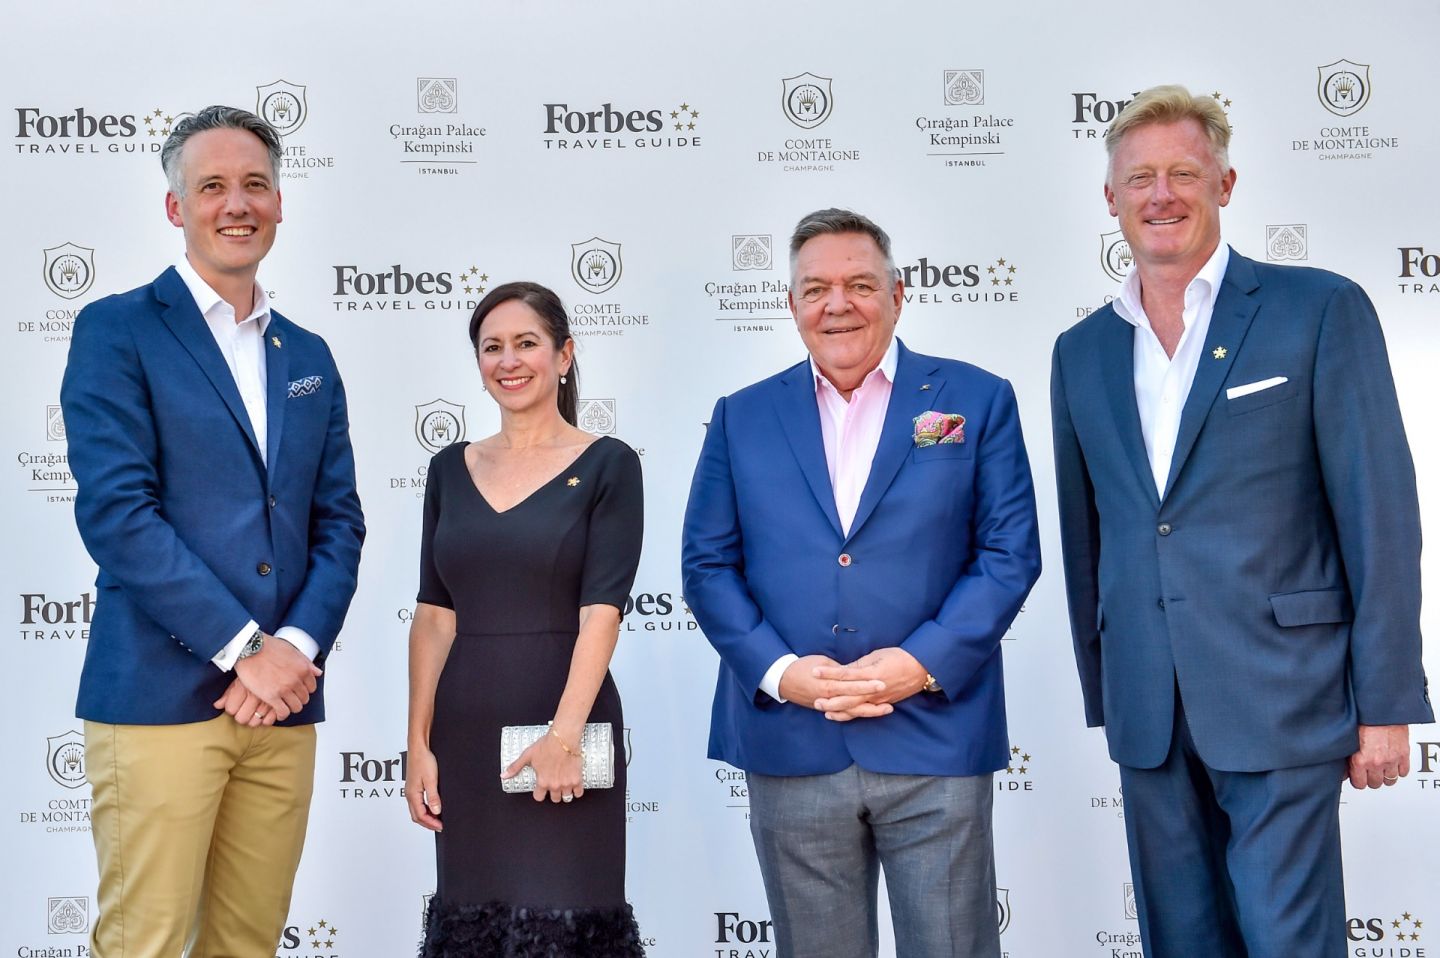 The Leaders of Europe’s Luxury Hospitality Community Gathered at Çırağan Palace Kempinski Istanbul to Celebrate Forbes Travel Guide’s 2022 Star Award Winners